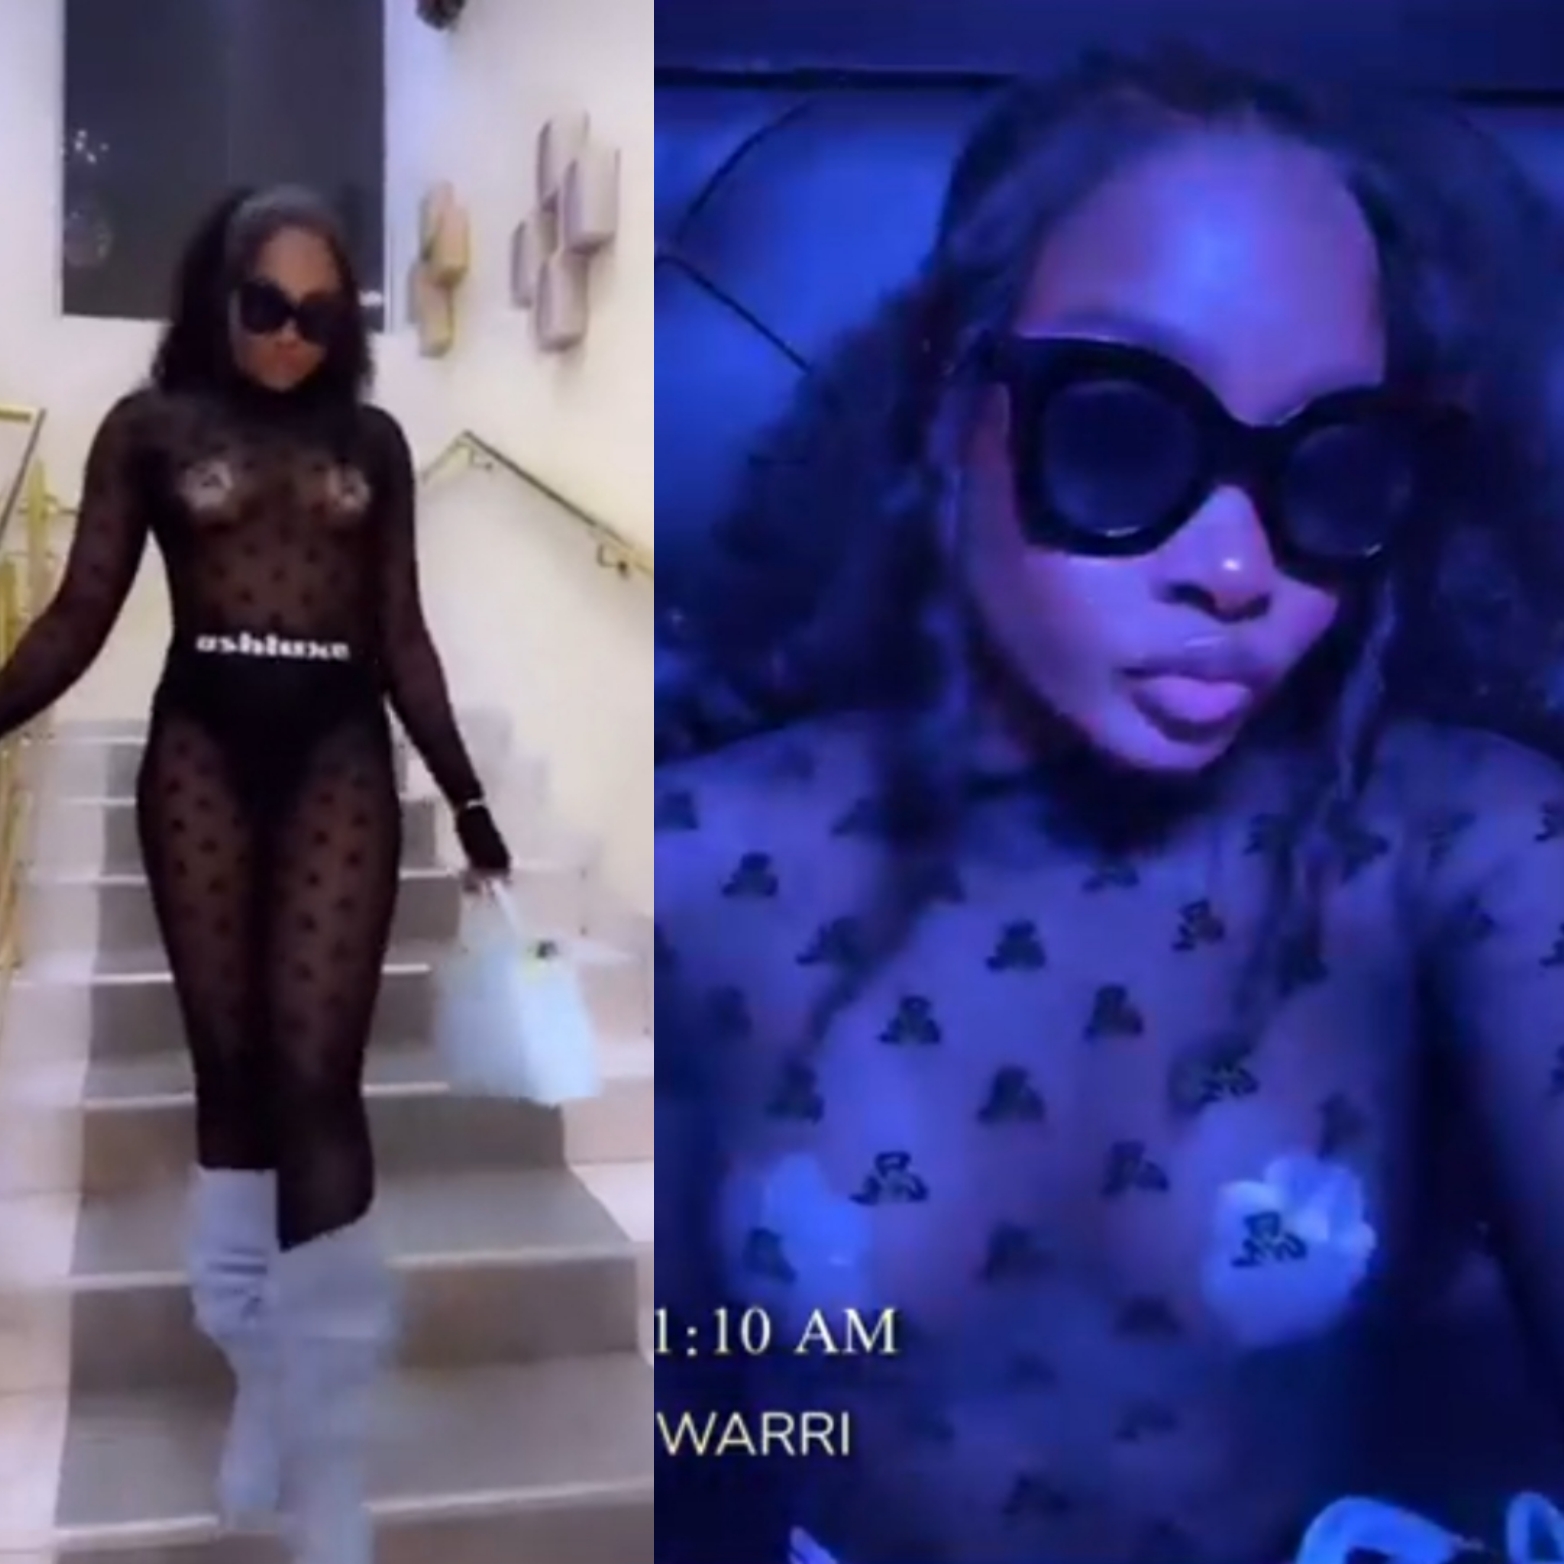 Ilebaye goes braless as she steps out in see-through outfit (video)